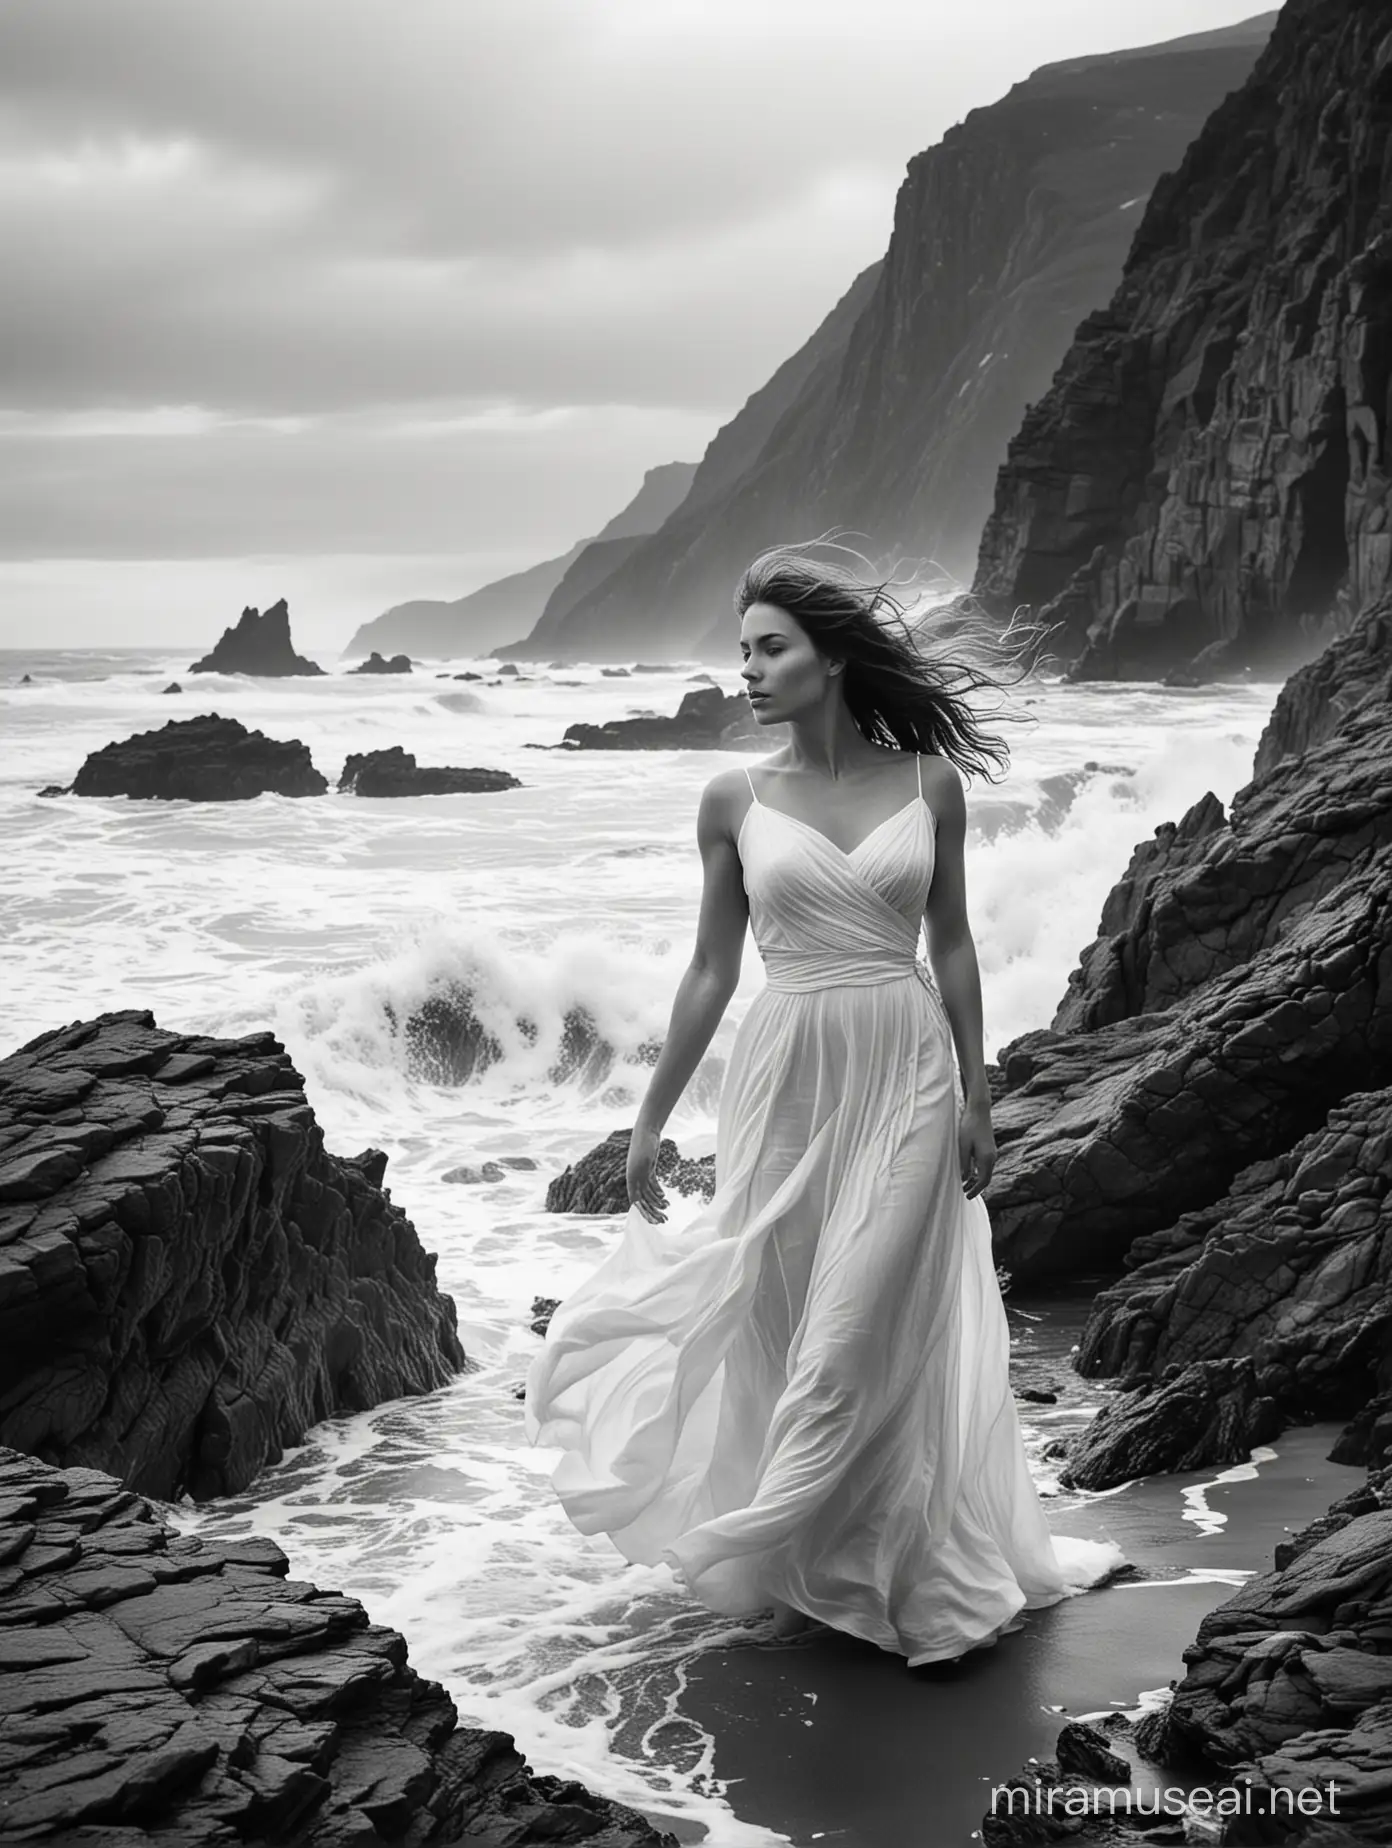 Photographic, cinematic, Amidst the rugged beauty of a windswept coastline, capture the ethereal allure of a black and white portrait of a lady. Let the crashing waves and rocky cliffs serve as a dramatic backdrop, framing her delicate features with the raw power of nature. Emphasize the contrast between her soft, serene presence and the untamed wilderness surrounding her, creating a captivating juxtaposition of strength and vulnerability.